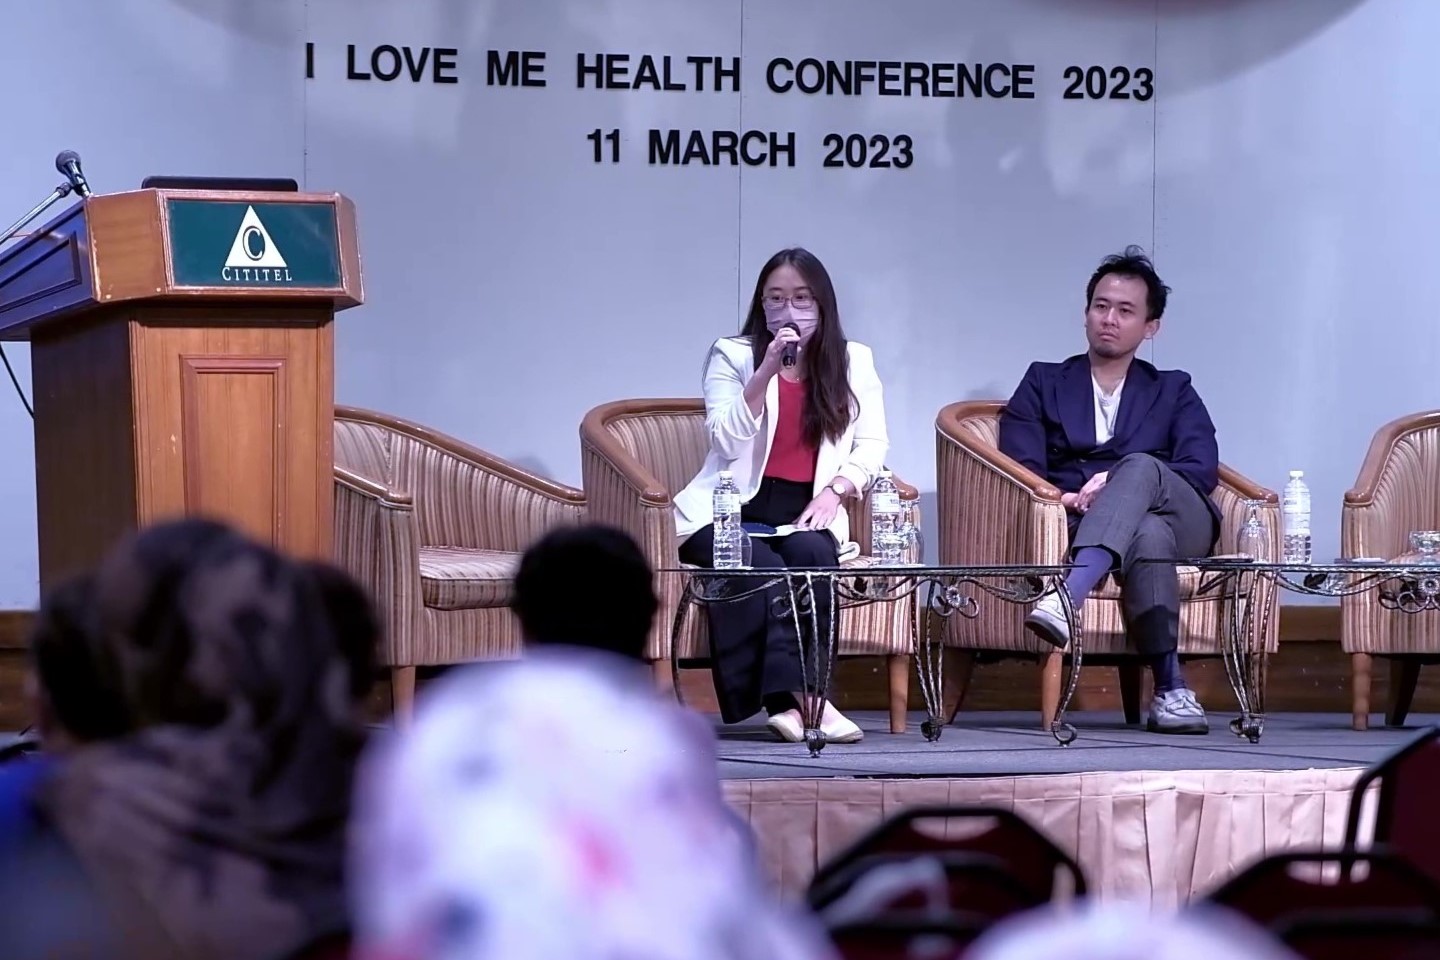 Copy of Vibrance-I love Me Health conference 2023 - frame at 1m43s